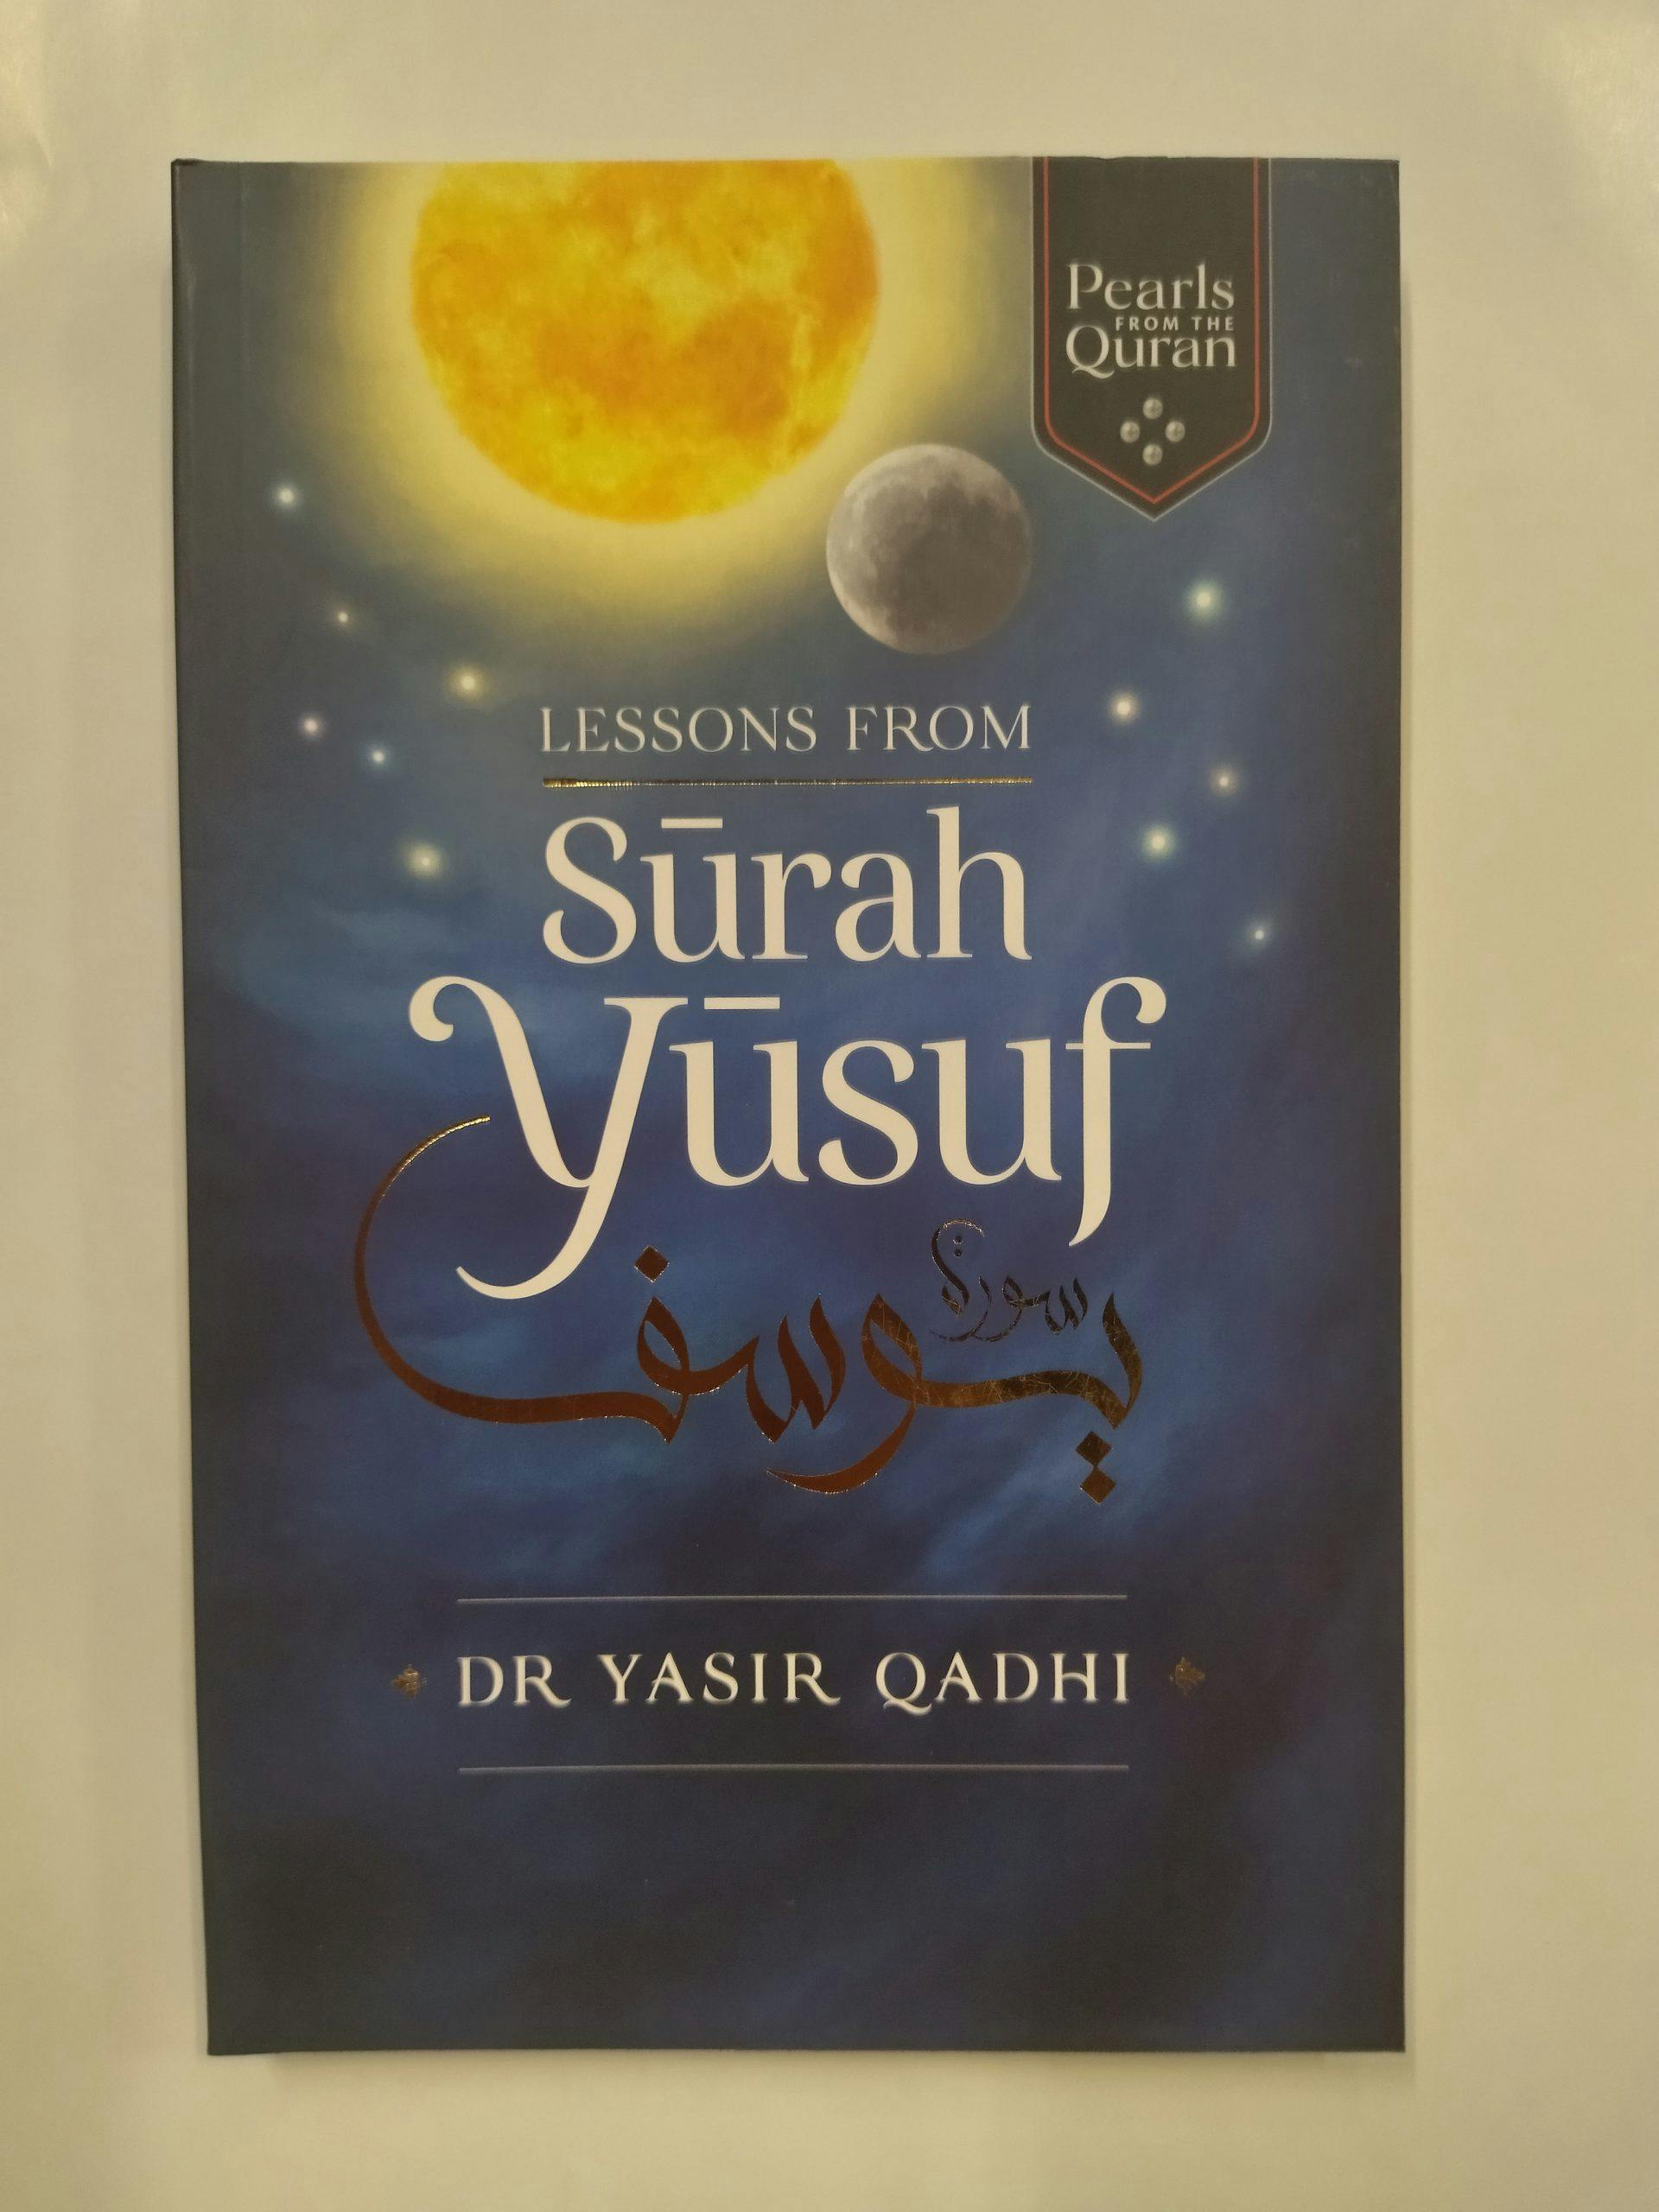 Lessons from Surah Yusuf (Pearls from the Qur'an) by Yasir Qadhi